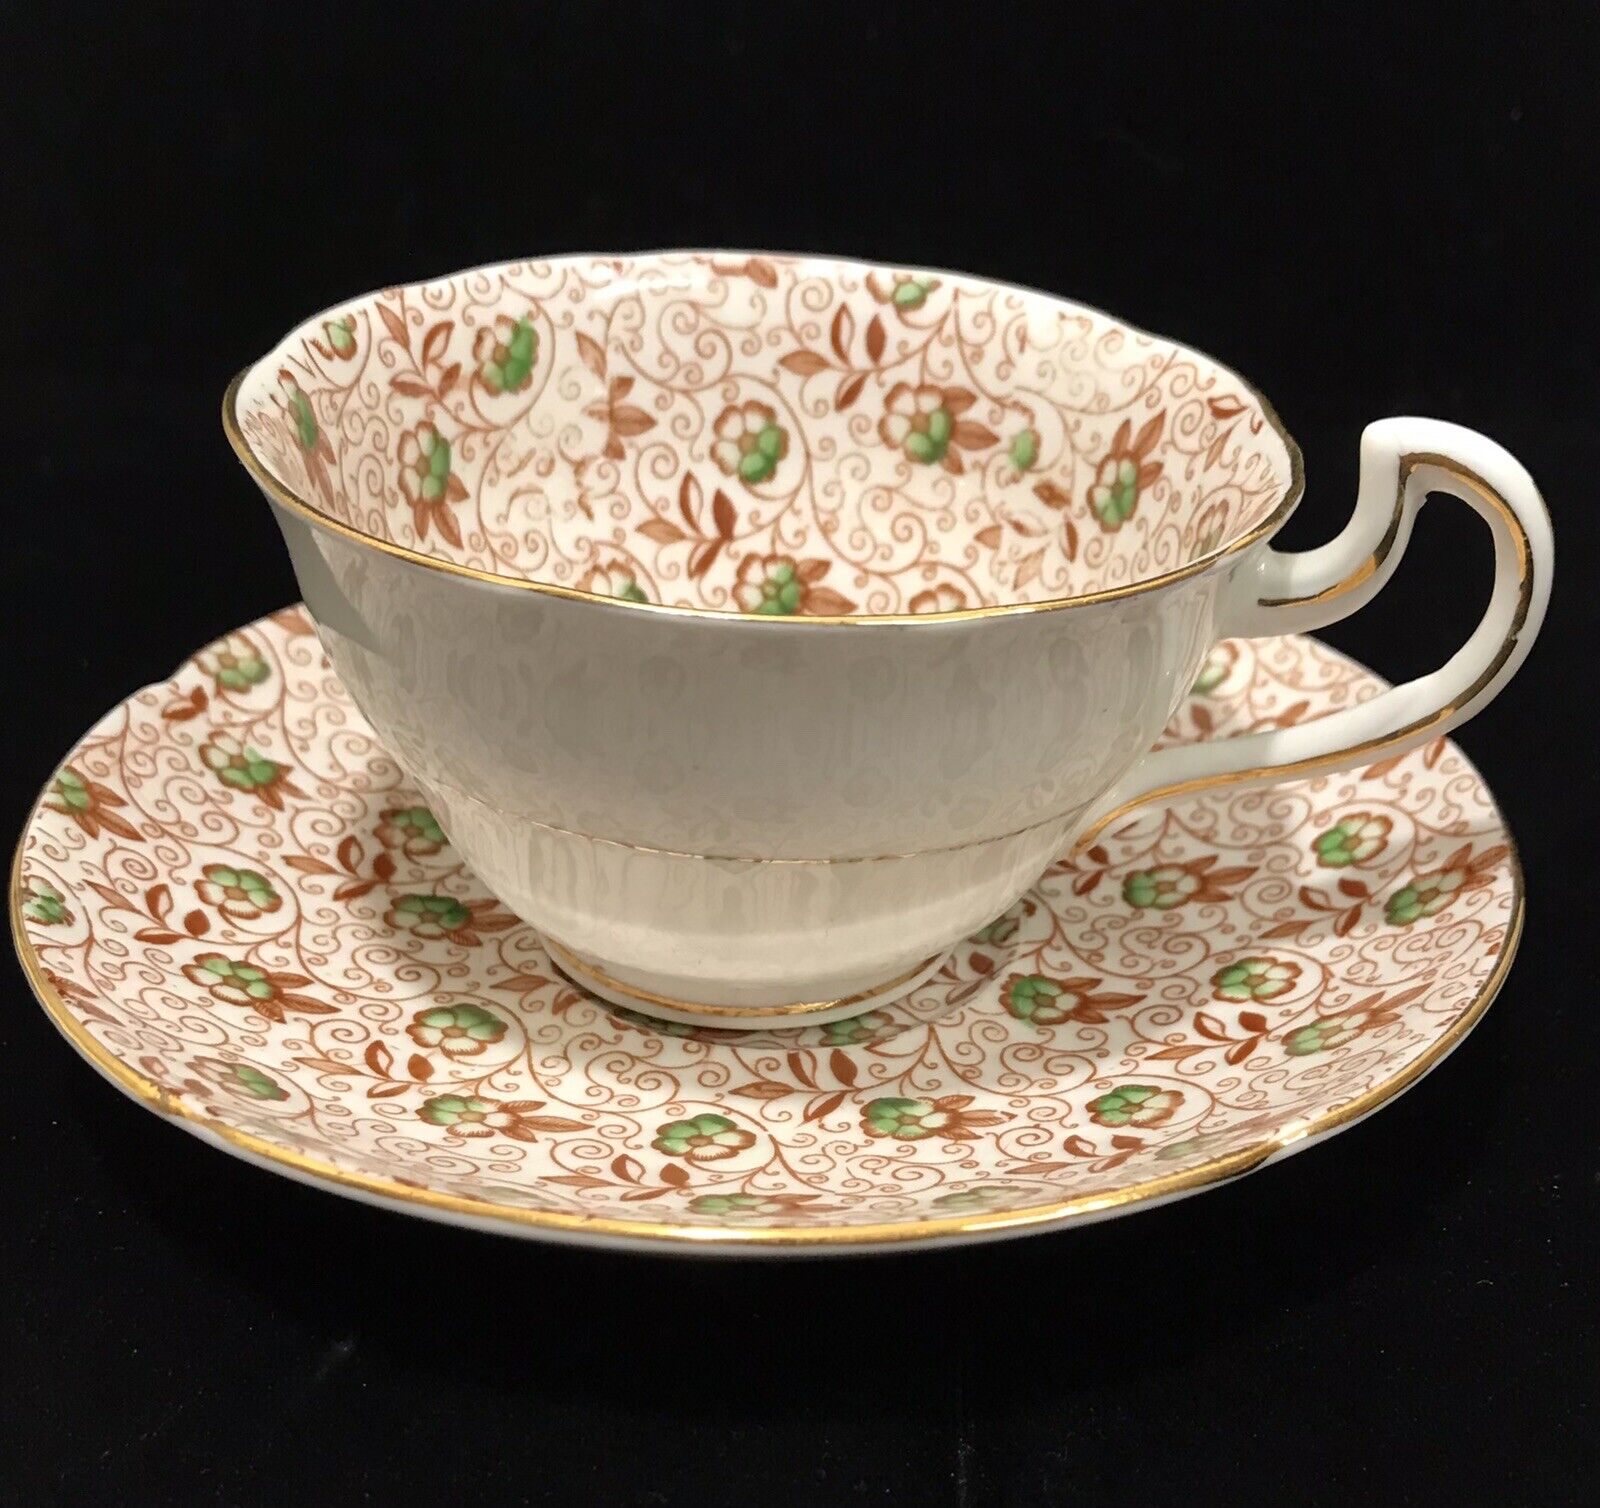 VINTAGE c.1948 SPENCER & STEVENSON saucer and cup bone china made in England